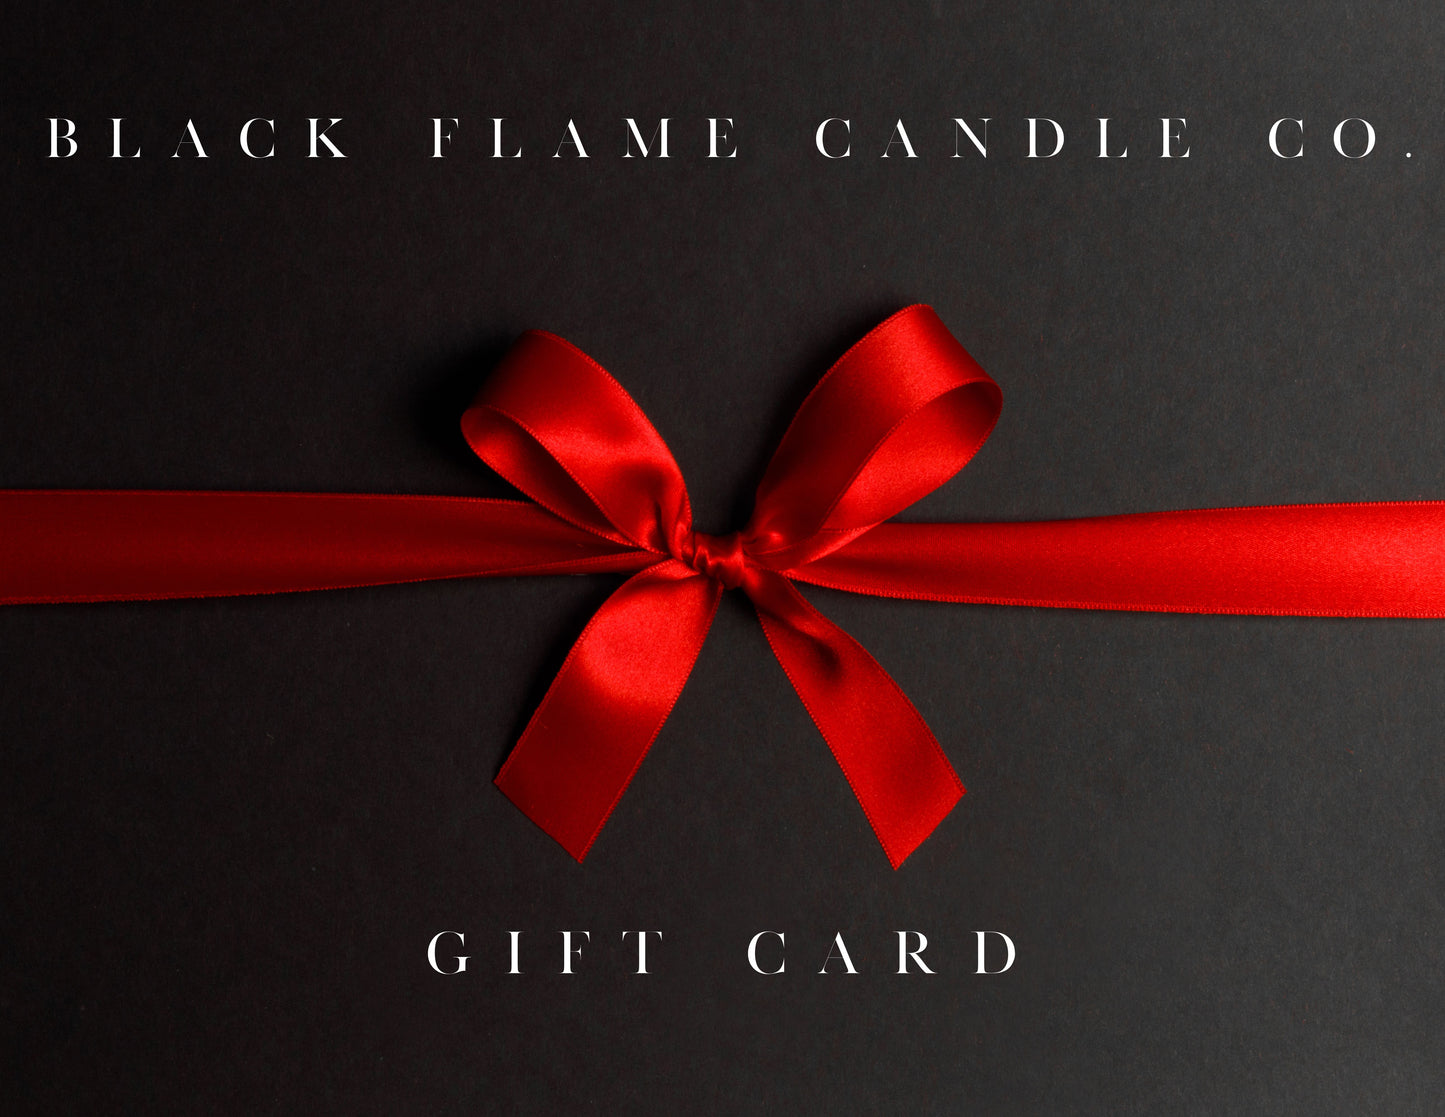 Black Flame Candle Co. Gift Card